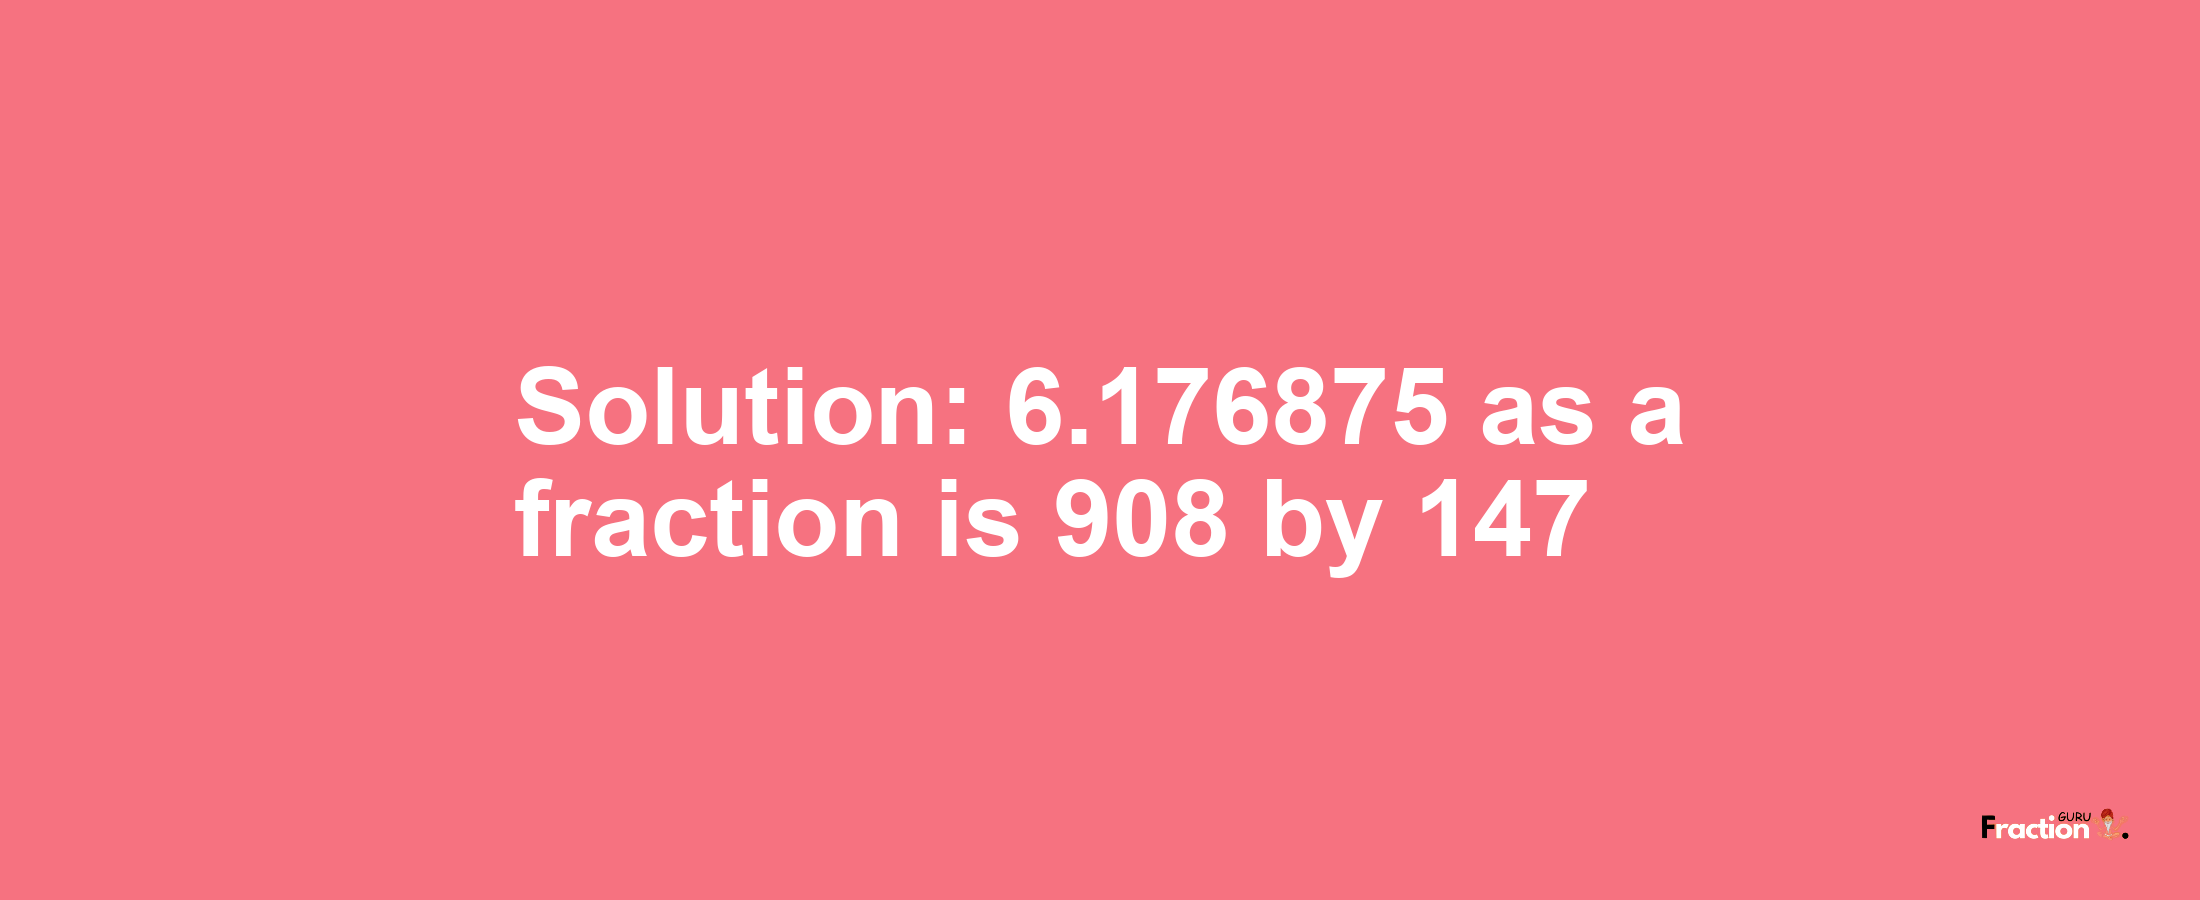 Solution:6.176875 as a fraction is 908/147